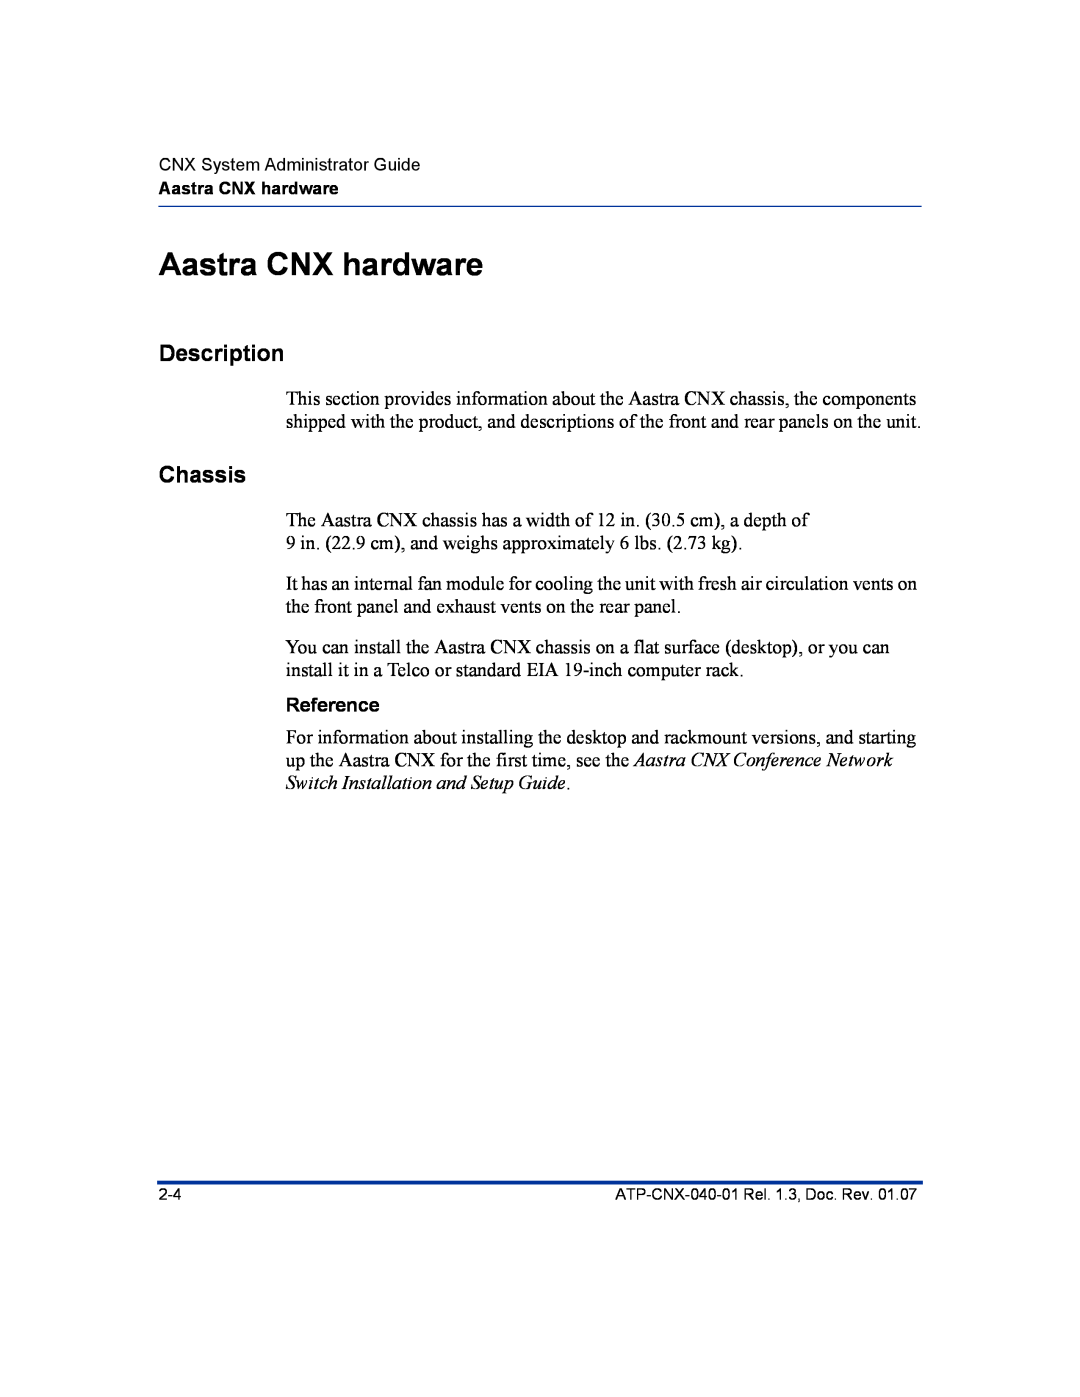 Aastra Telecom ATP-CNX-040-01 manual Aastra CNX hardware, Description, Chassis, Reference 